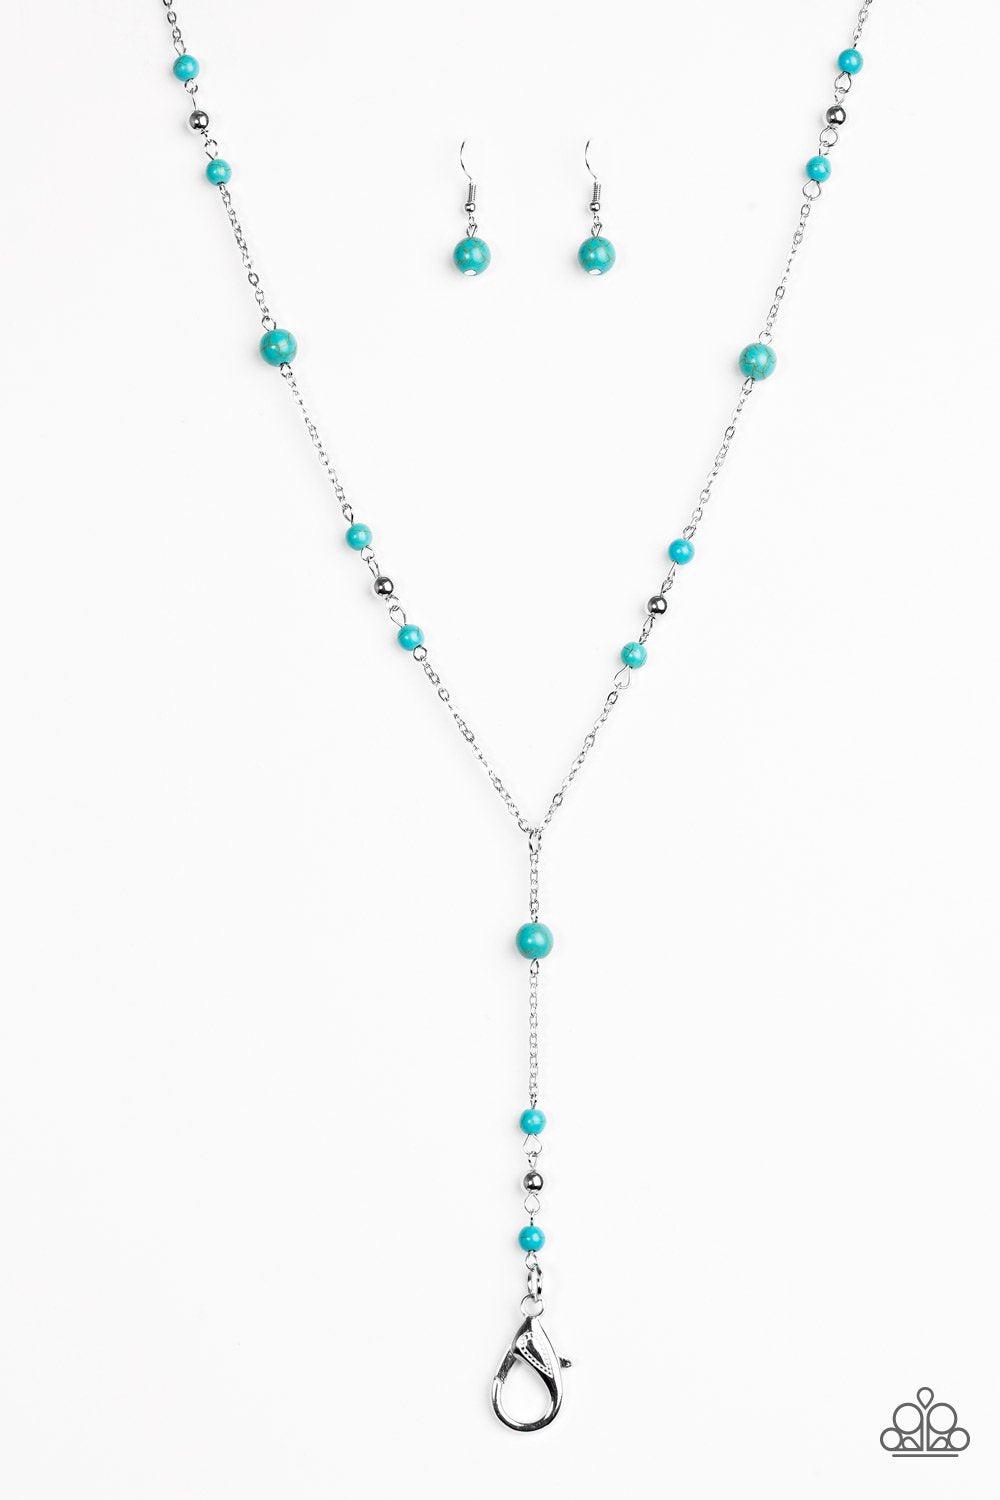 Modern Mountaineer Turquoise Blue Stone Lanyard Necklace - Paparazzi Accessories-CarasShop.com - $5 Jewelry by Cara Jewels